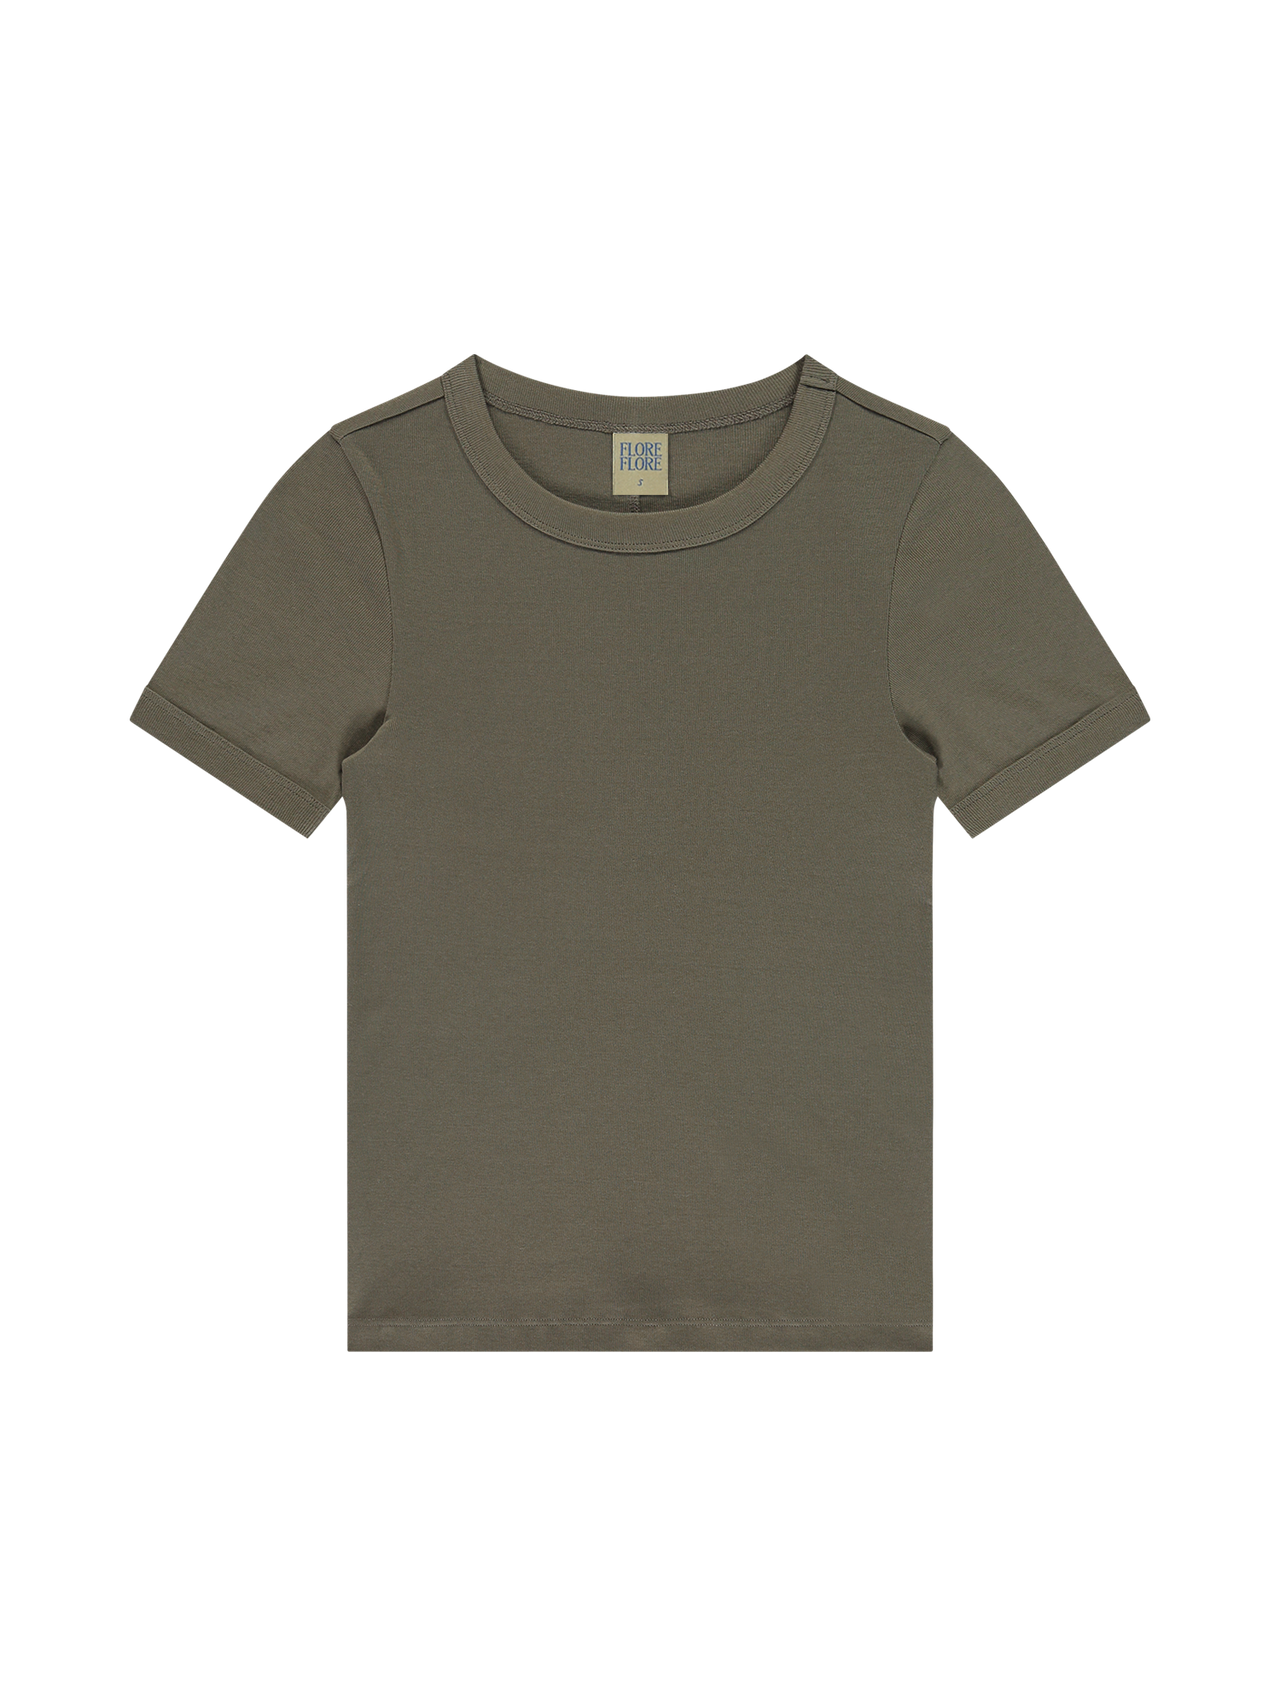 CAR TEE BY FLORE FLORE